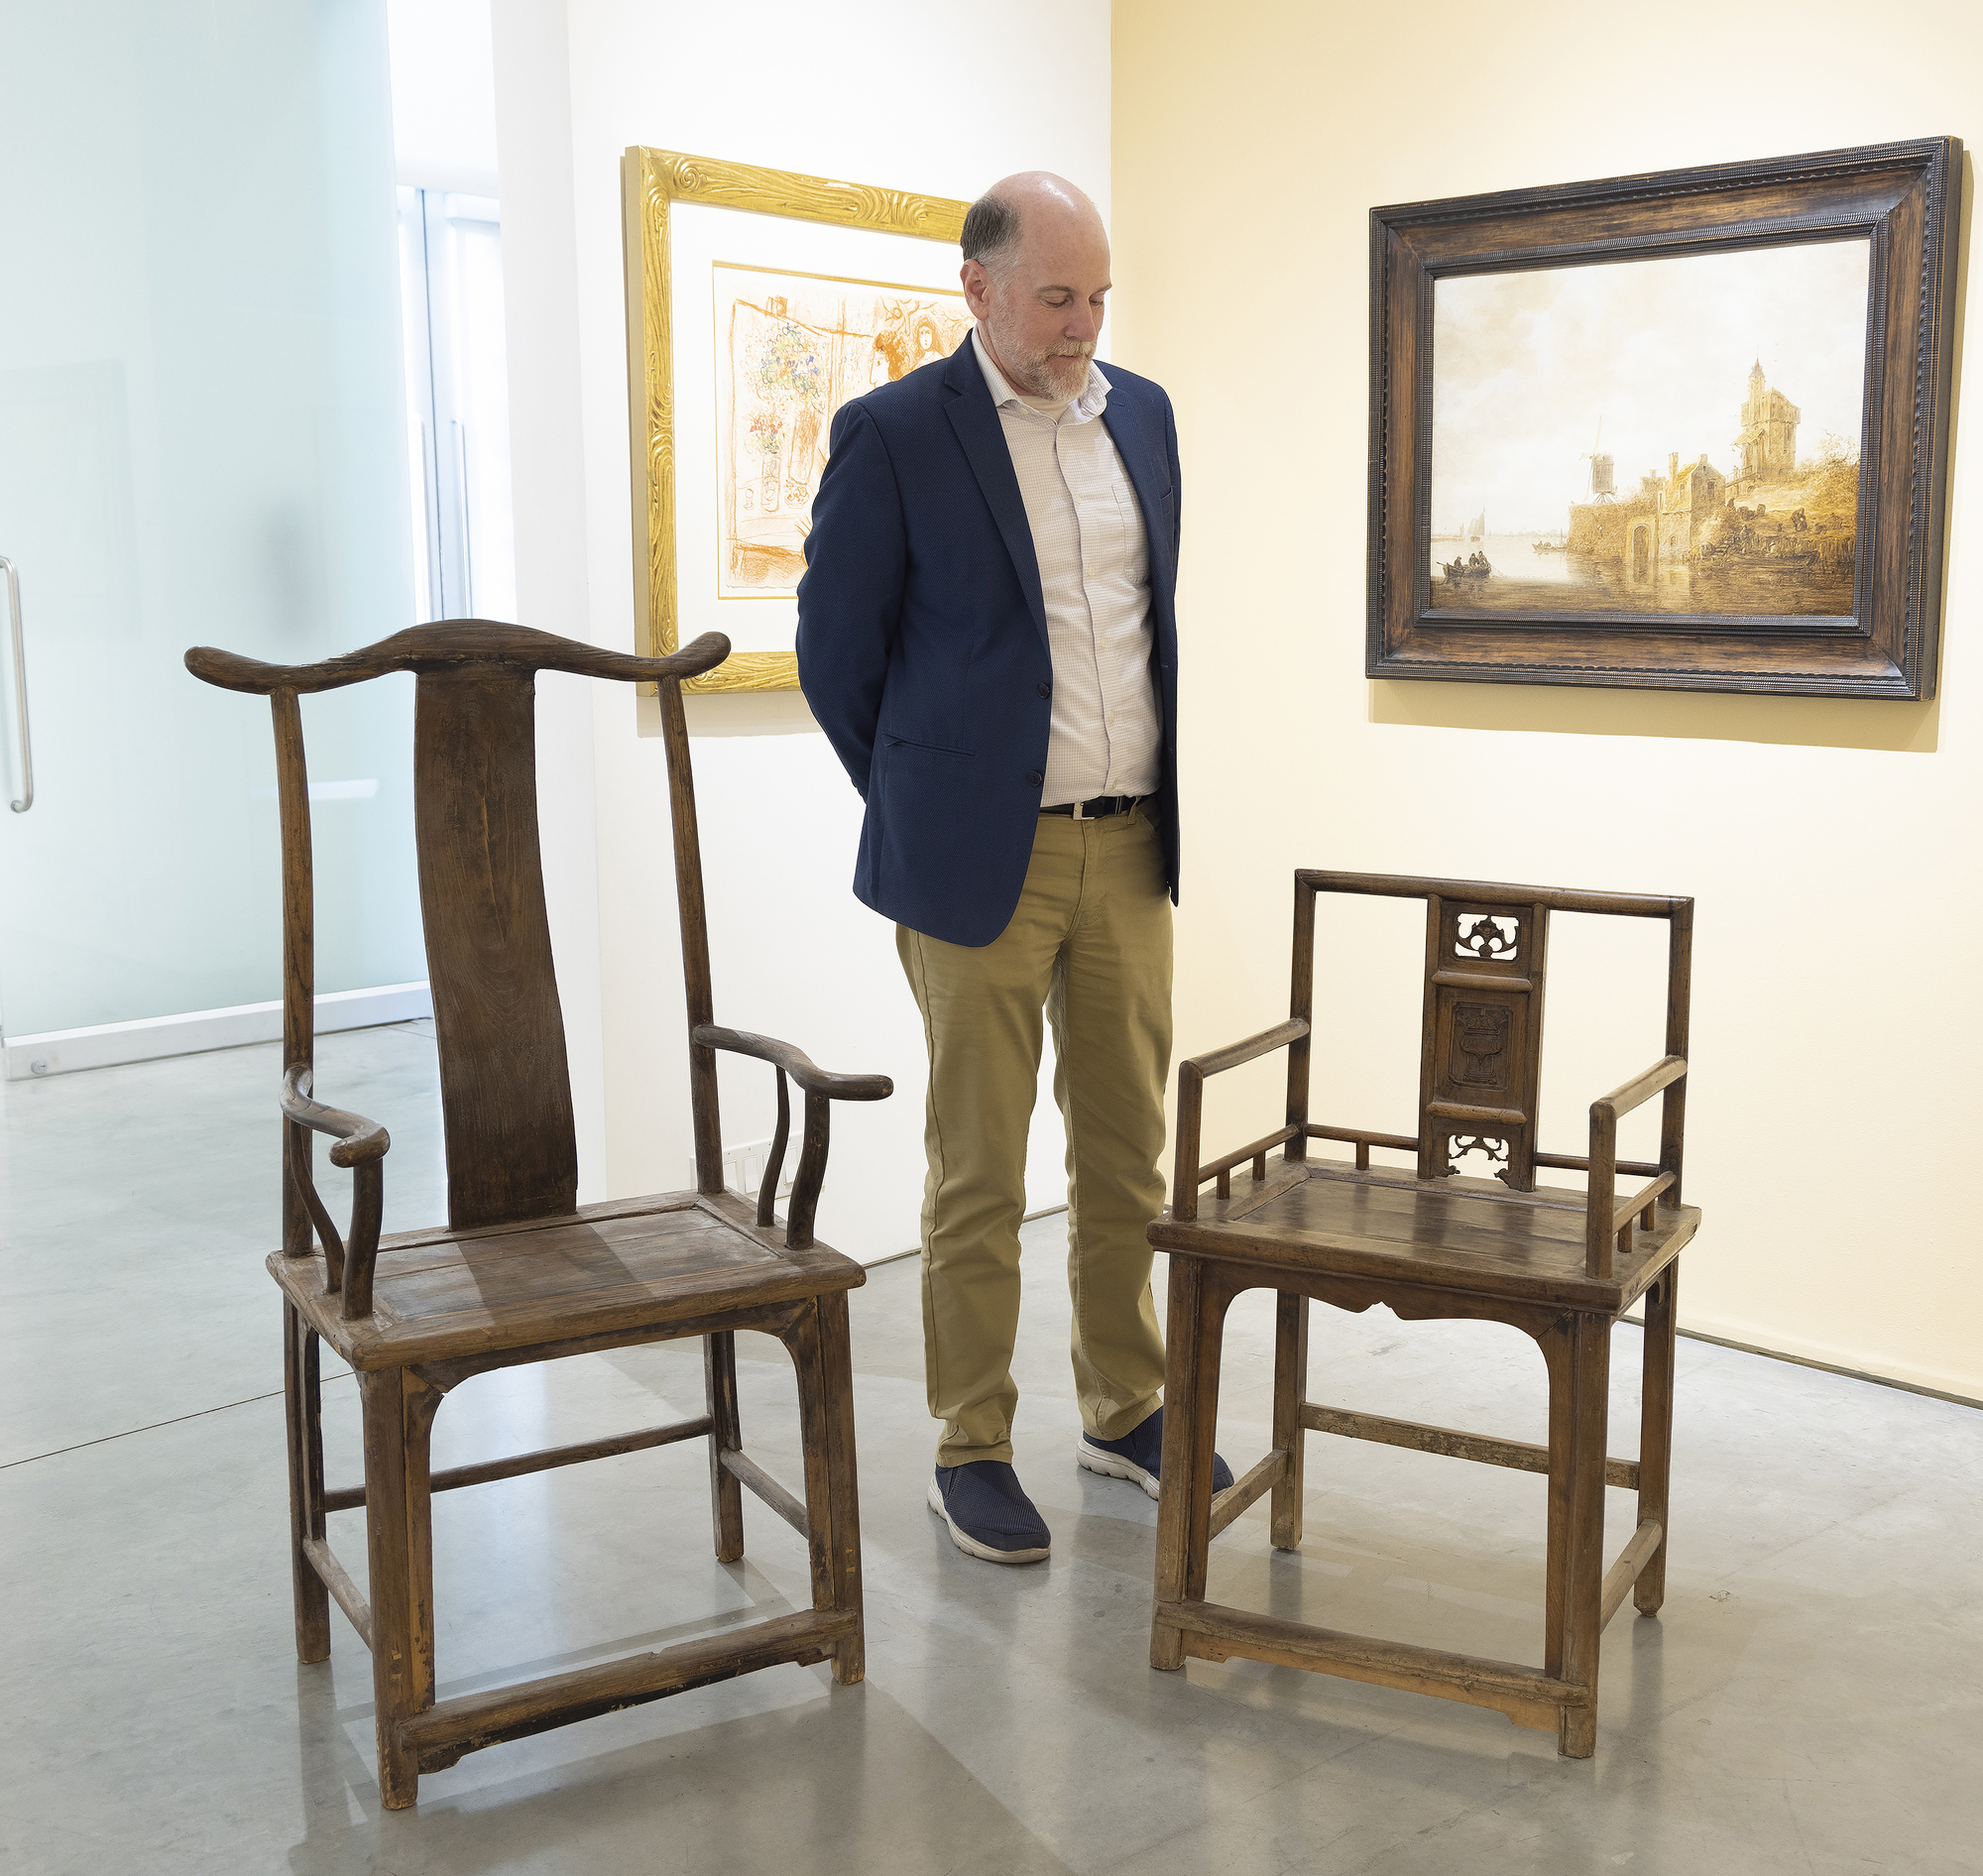 AI WEIWEI - "Fairytale" Chairs - wood - 49 x 45 x 17 1/2 in.